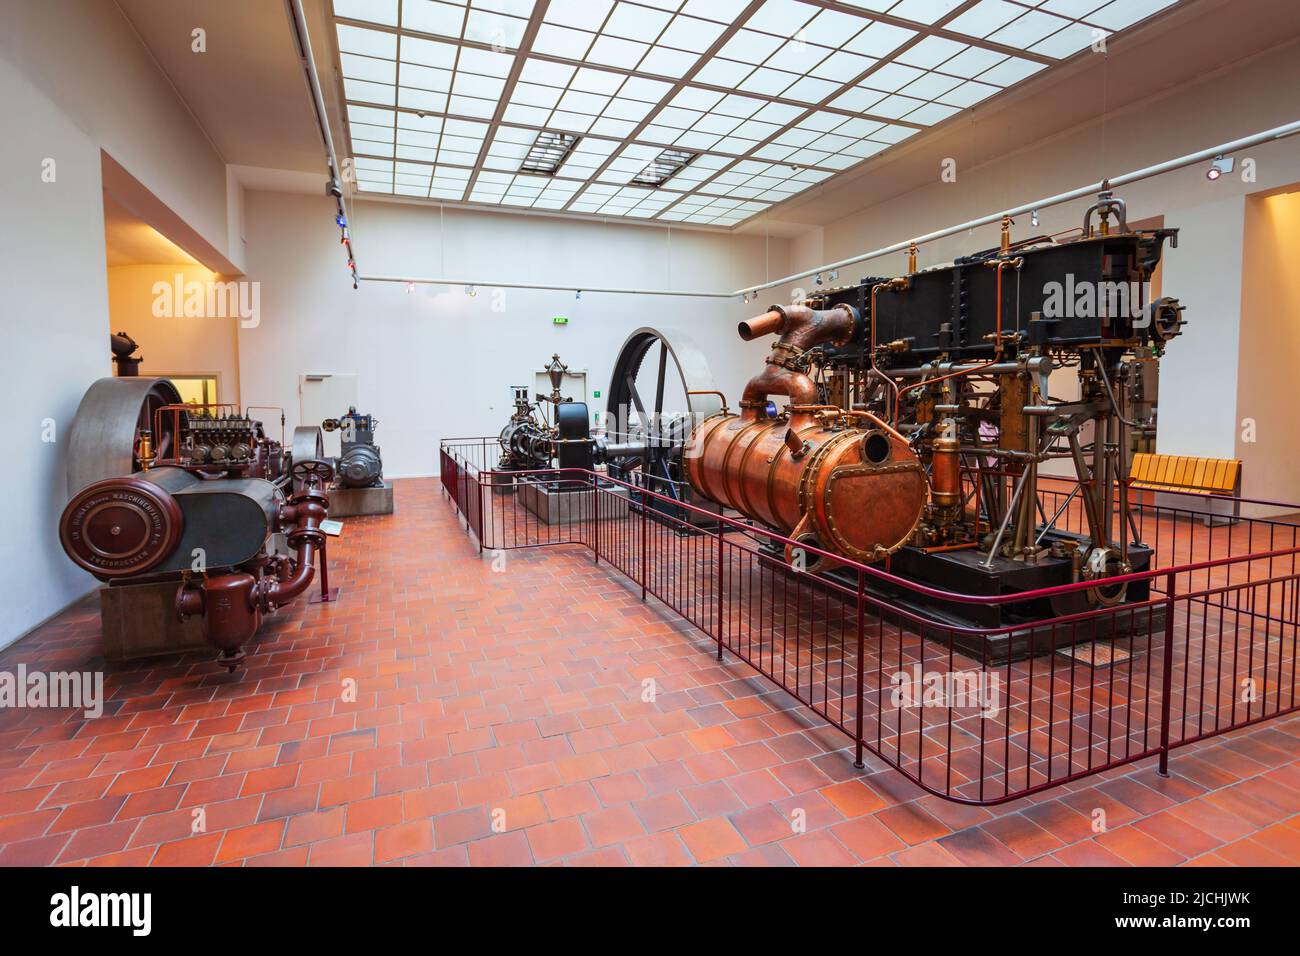 Munich, Germany - July 07, 2021: Deutsches Museum or German Museum of Masterpieces of Science and Technology in Munich, Germany Stock Photo